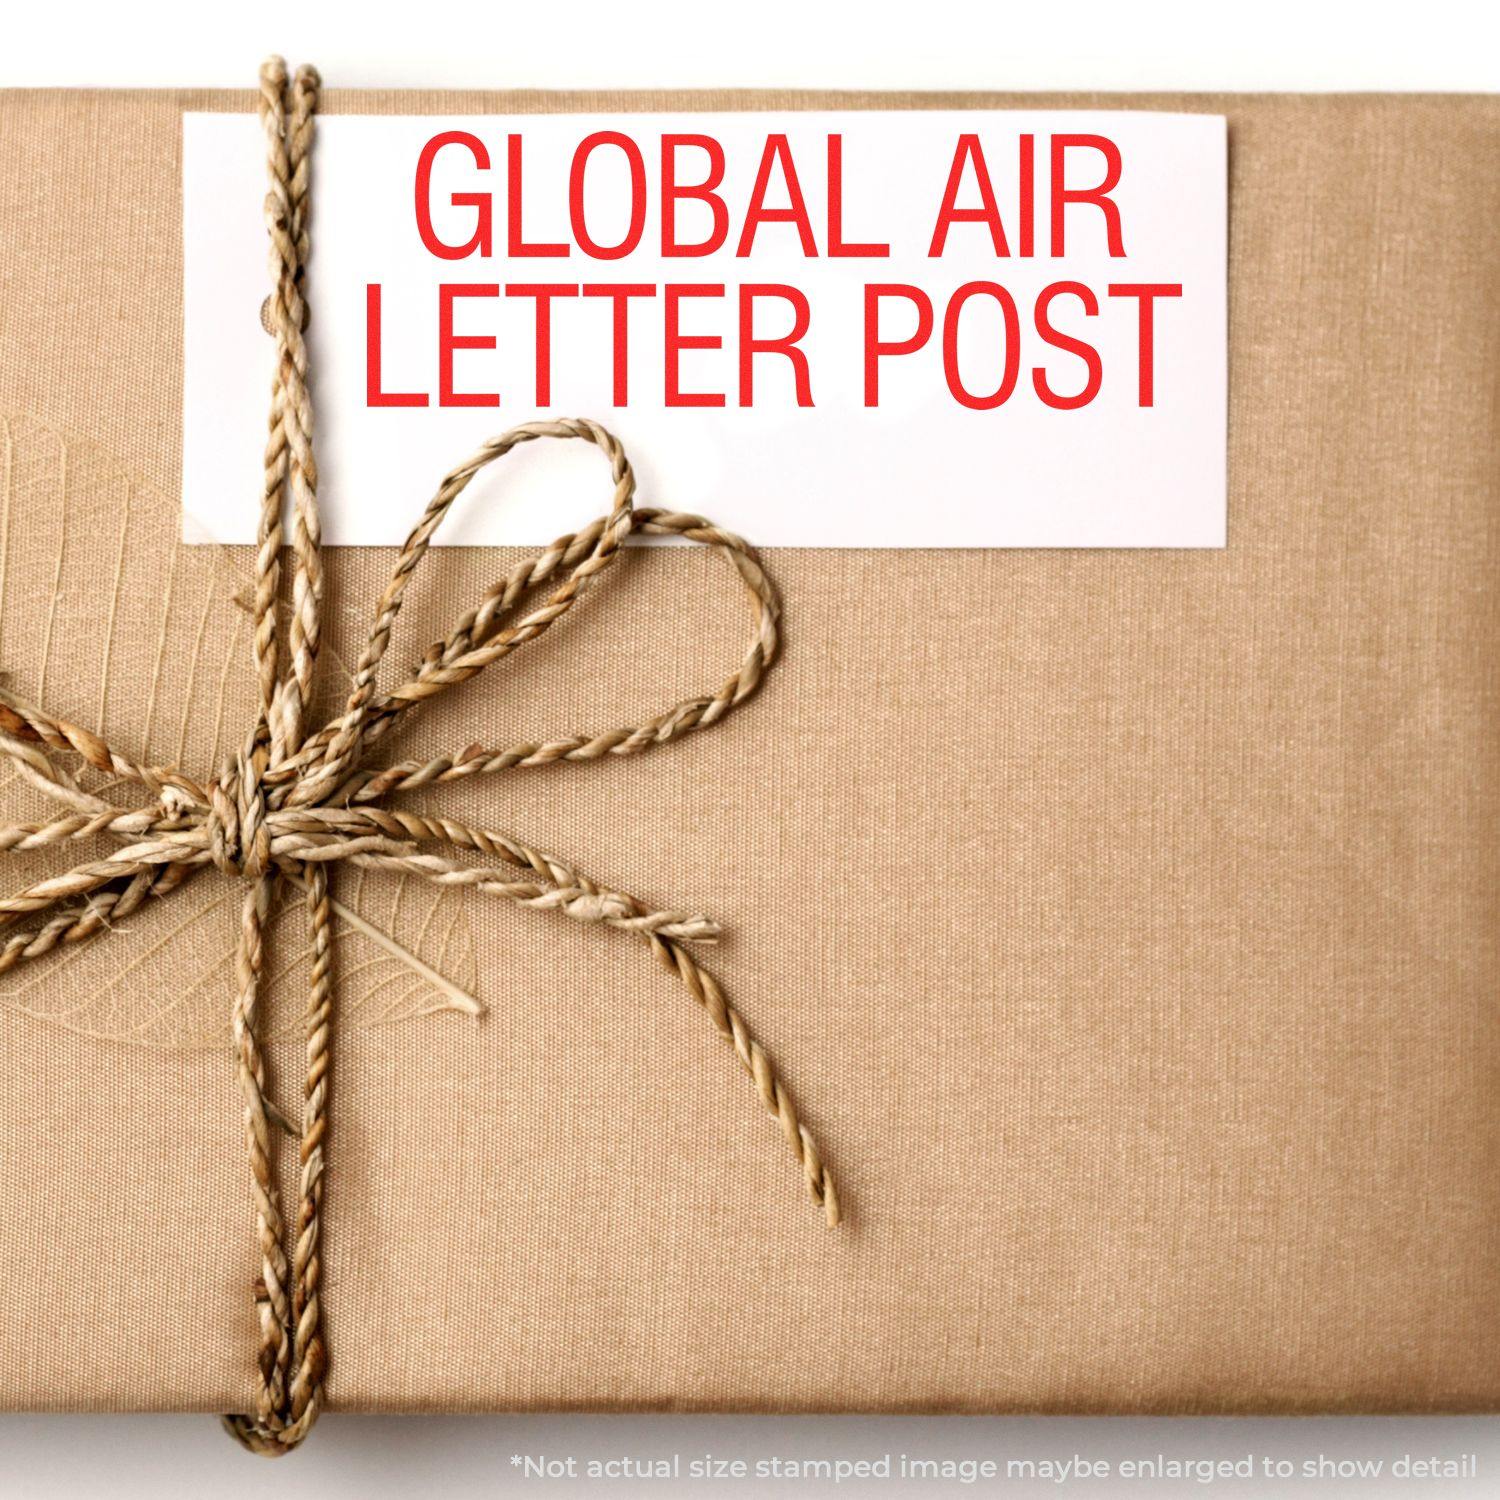 A self-inking stamp with a stamped image showing how the text "GLOBAL AIR LETTER POST" is displayed after stamping.